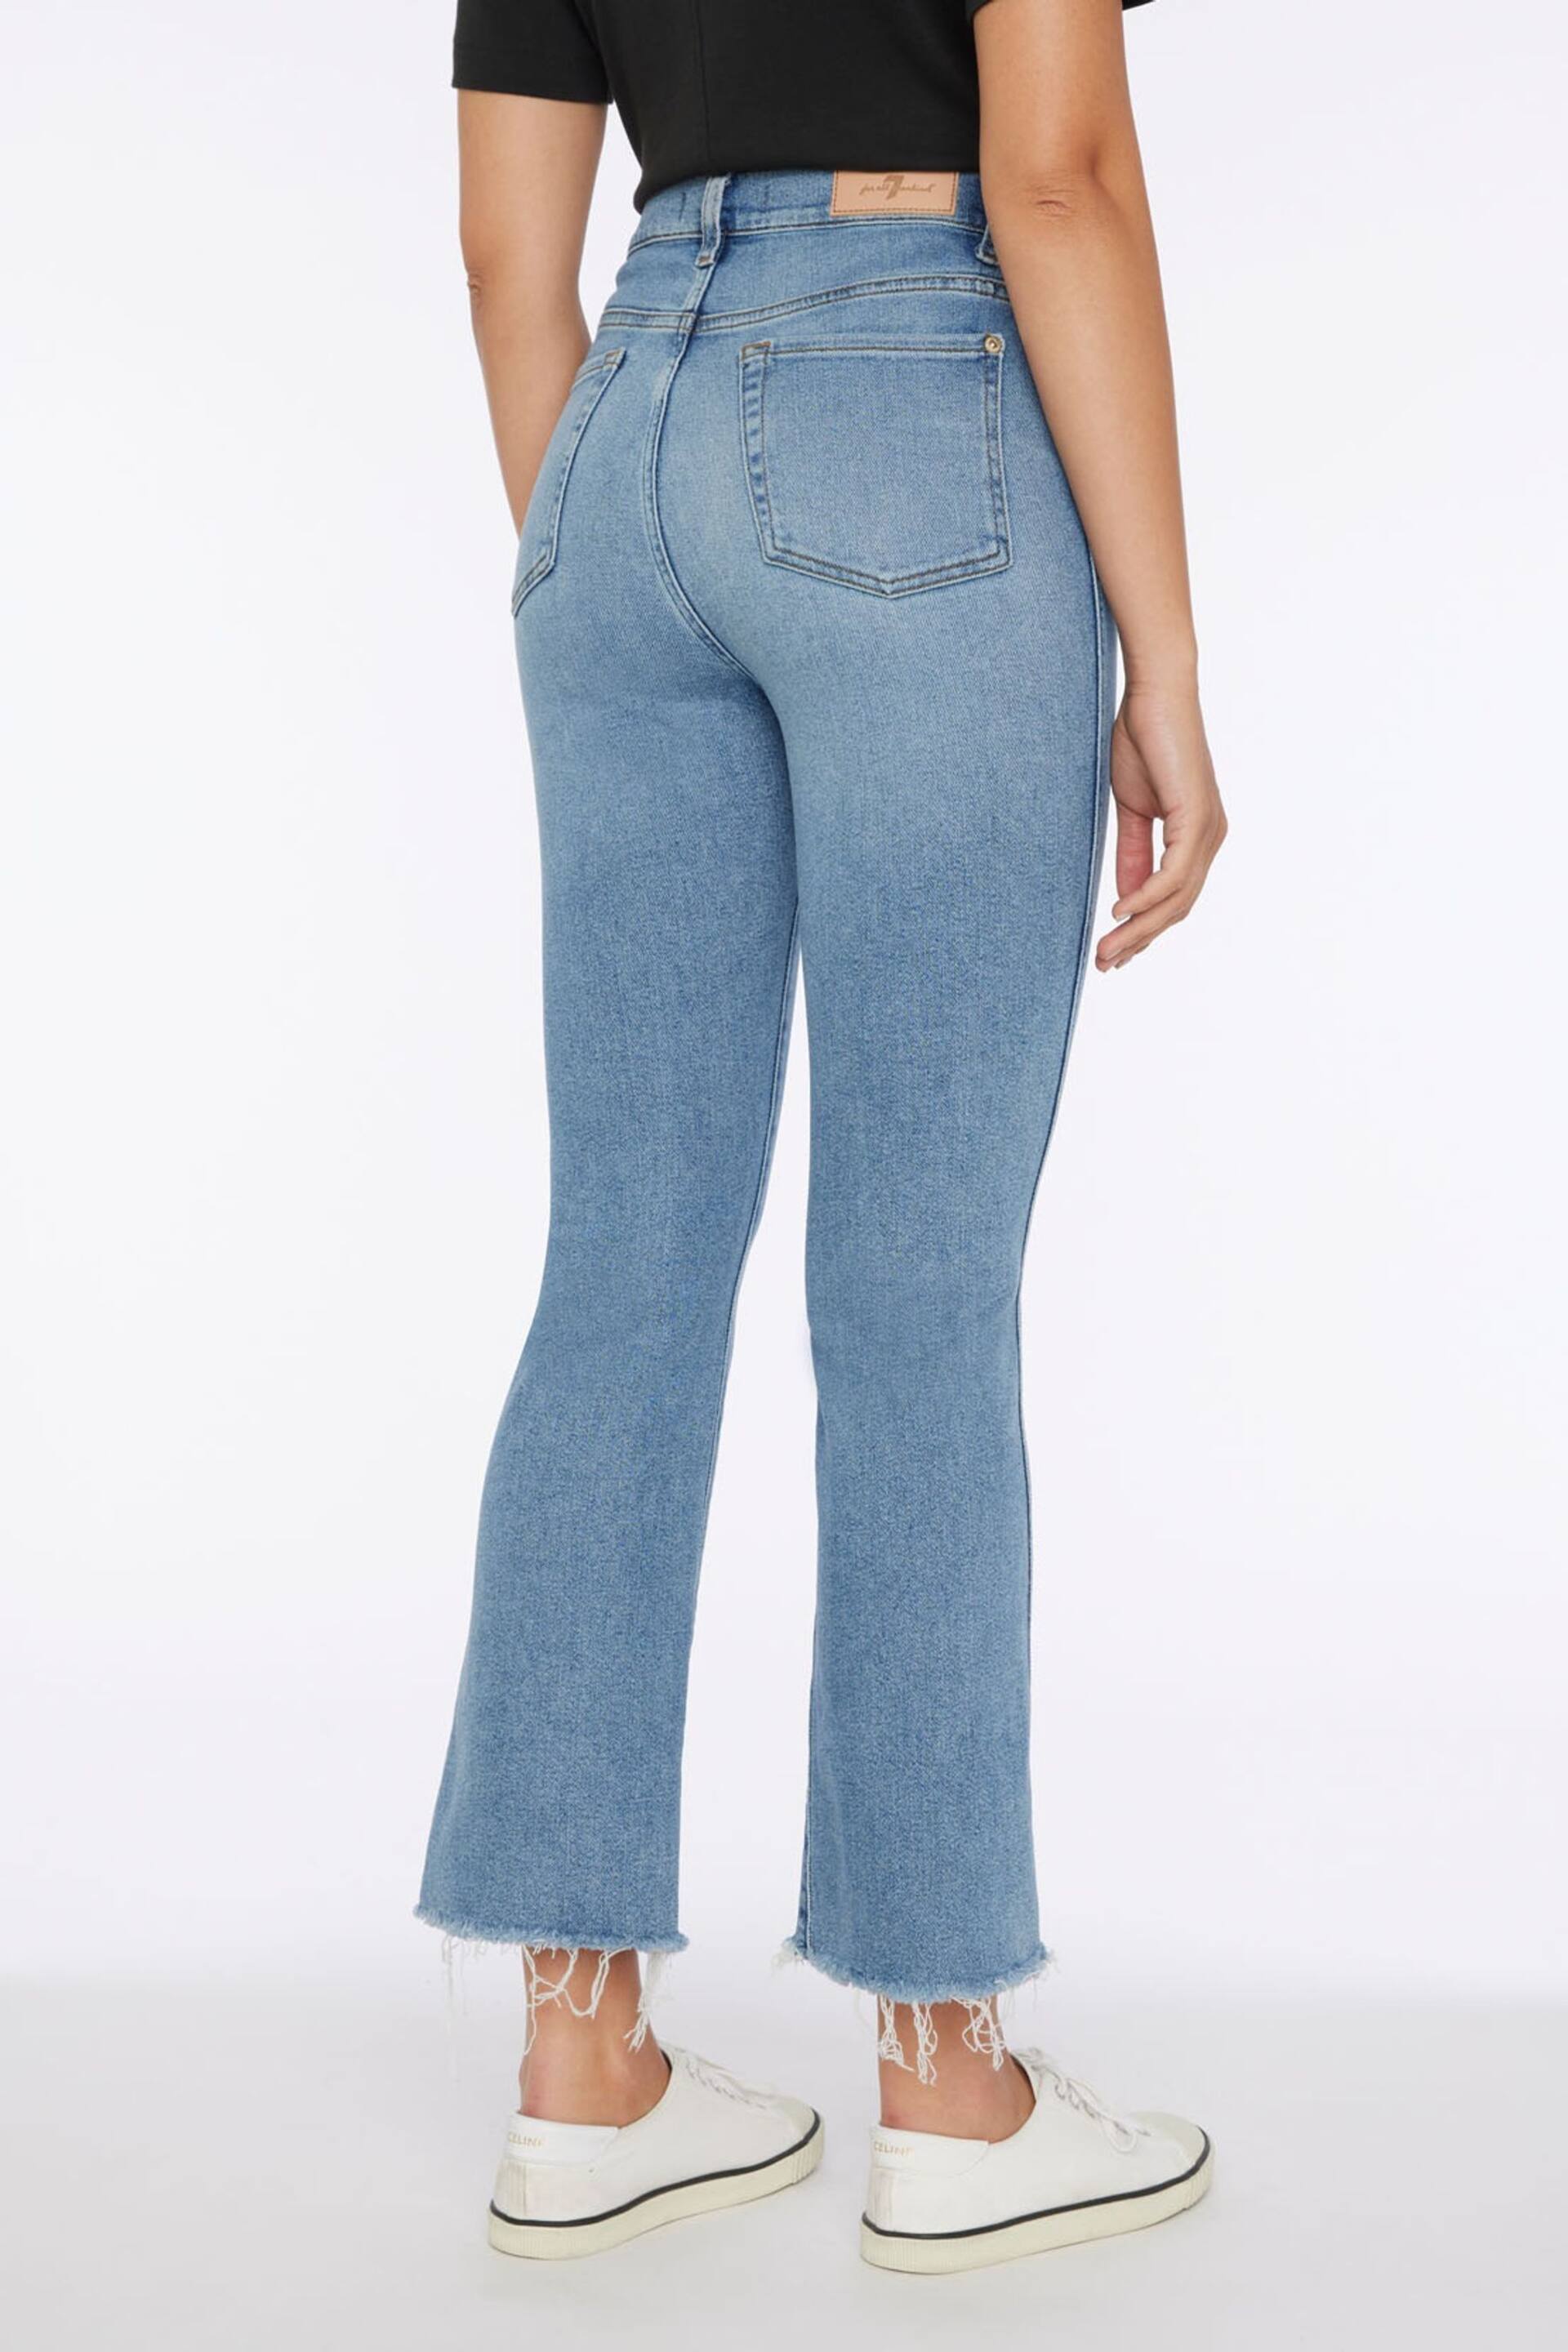 7 For All Mankind Slim Kick Flare Luxe Raw Hem Blue Jeans - Image 2 of 3